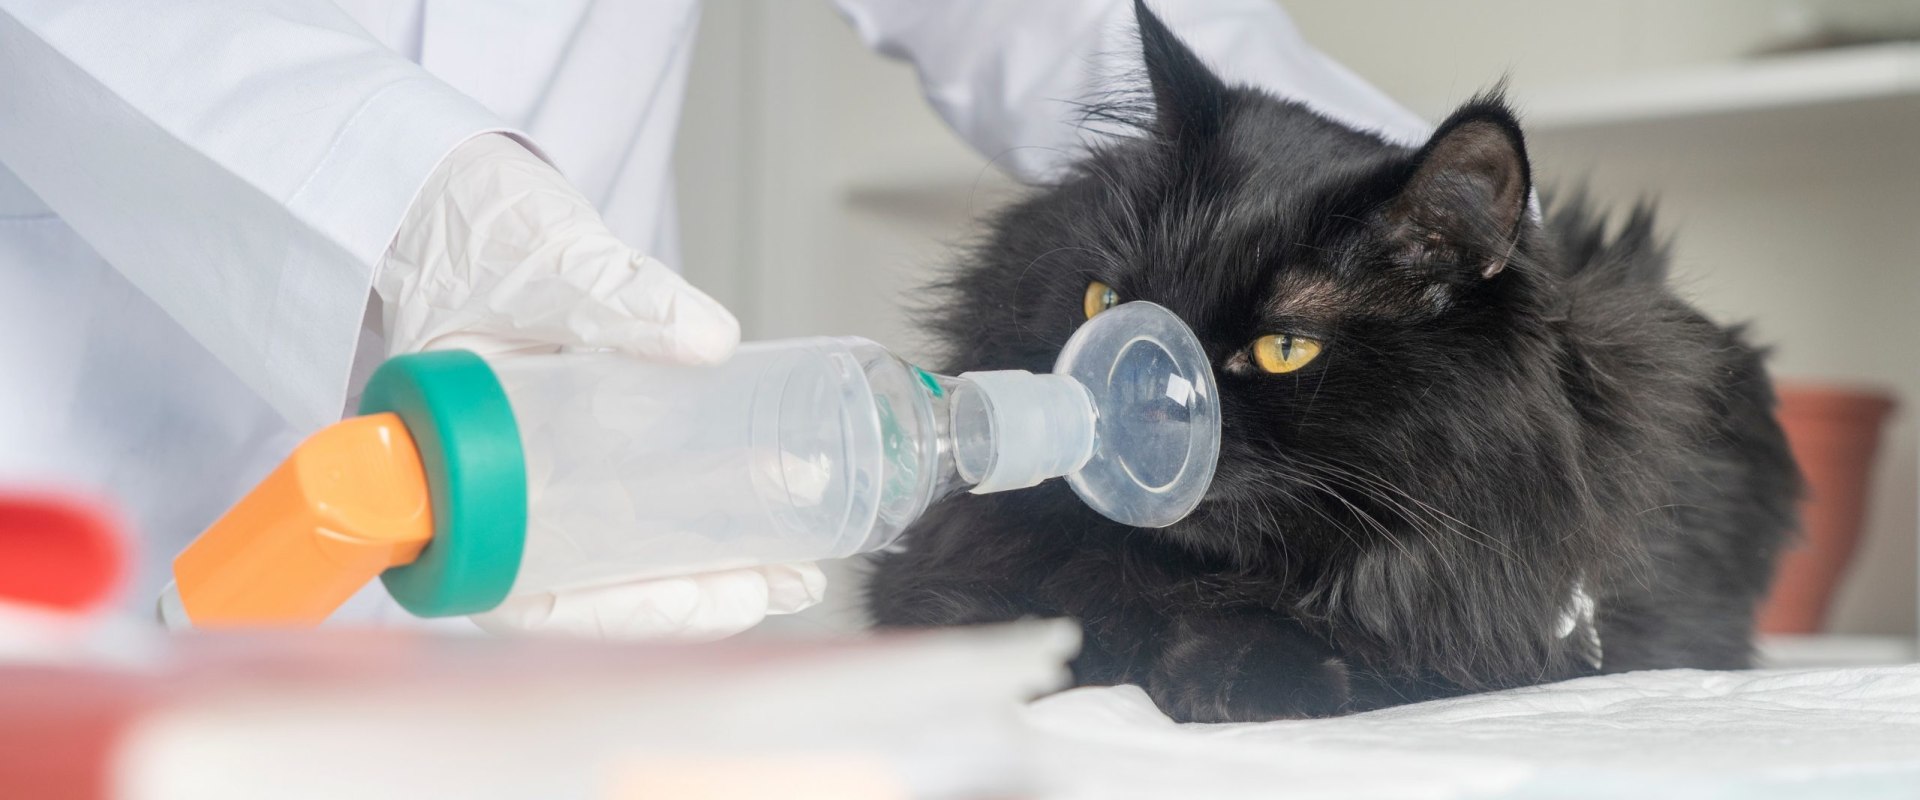 Feline Asthma: What You Need to Know